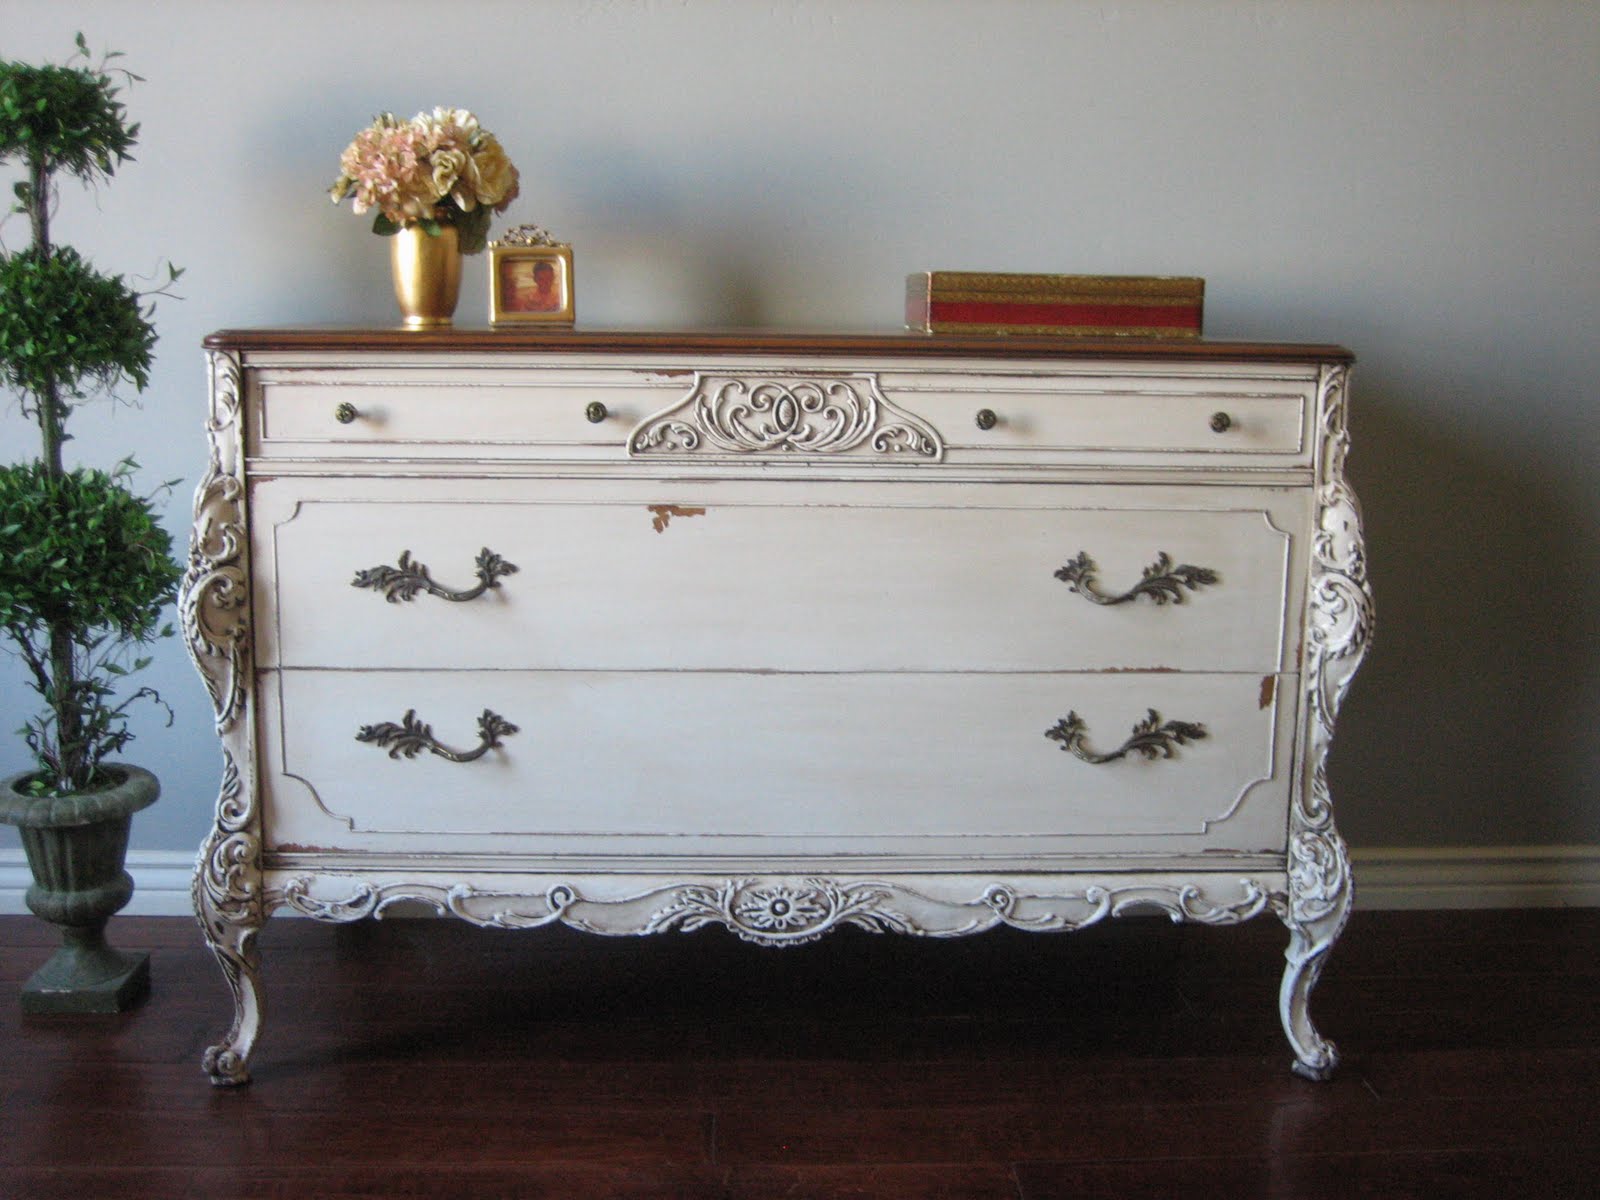 Shabby Chic DIY Furniture Projects